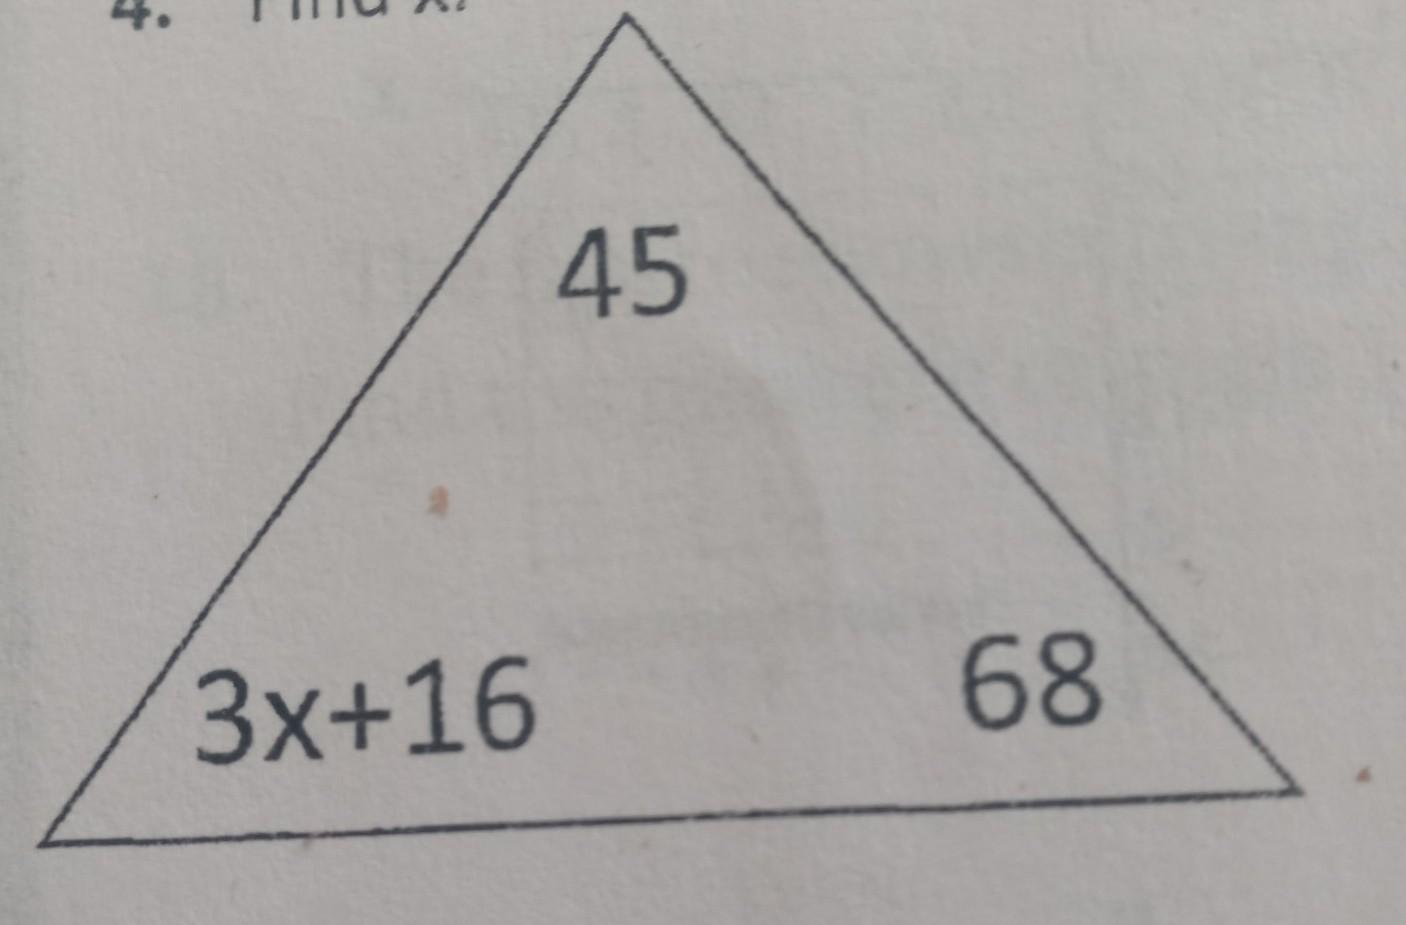 Determine If I Triangle Can Be Constructed With The Following Sides. Explain2/3 , 4/5 , 1/2 What Value